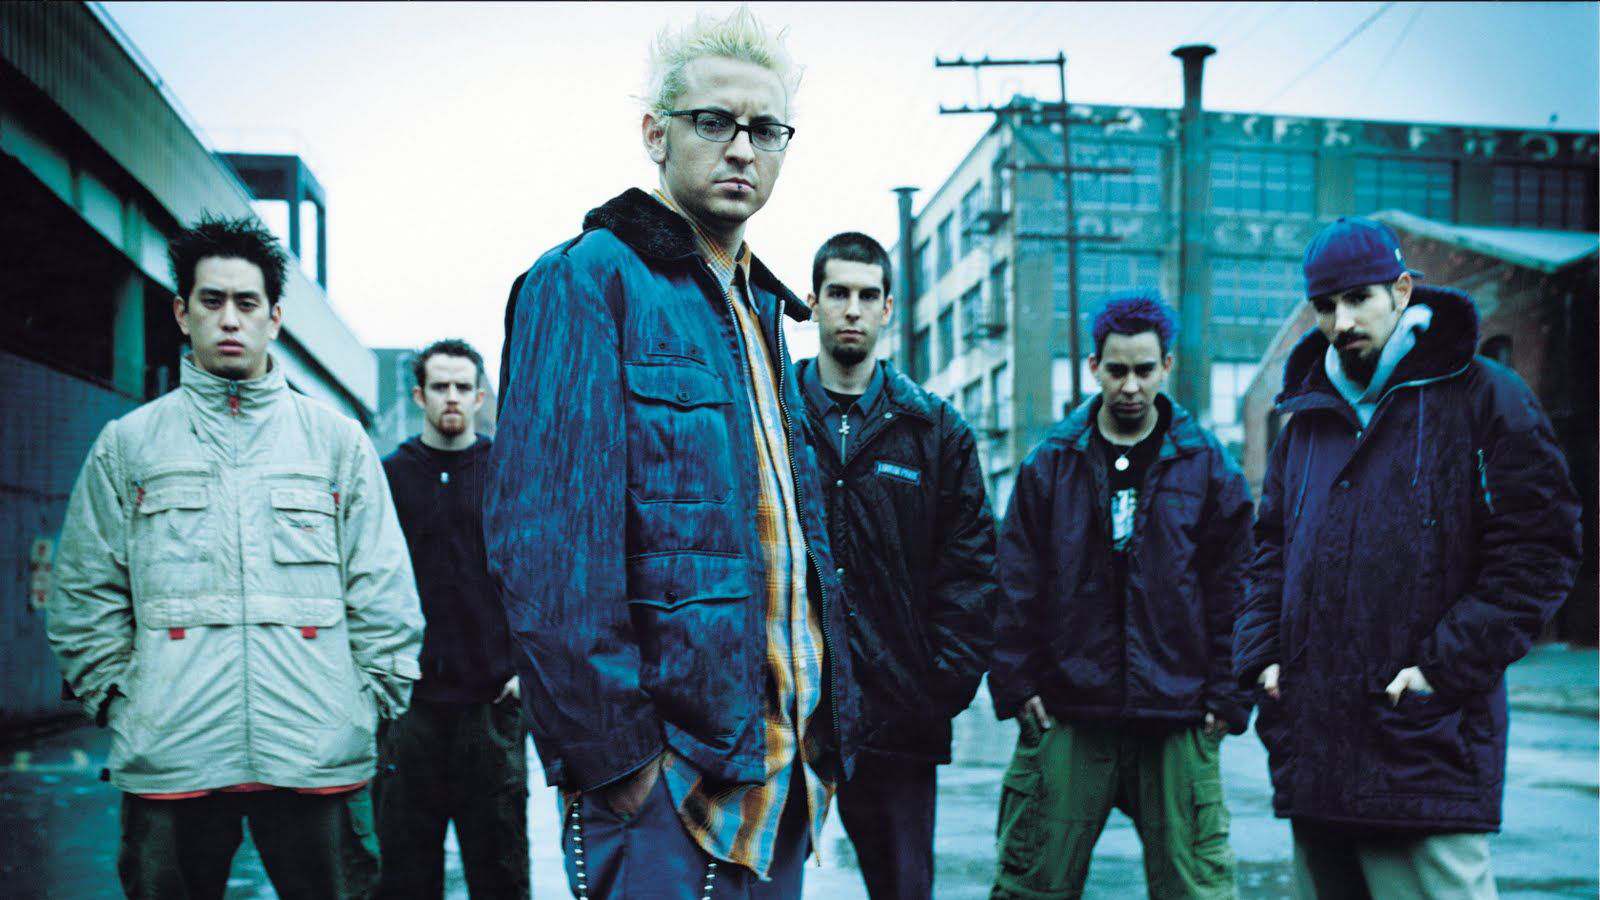 LINKIN PARK: Our label tried to 